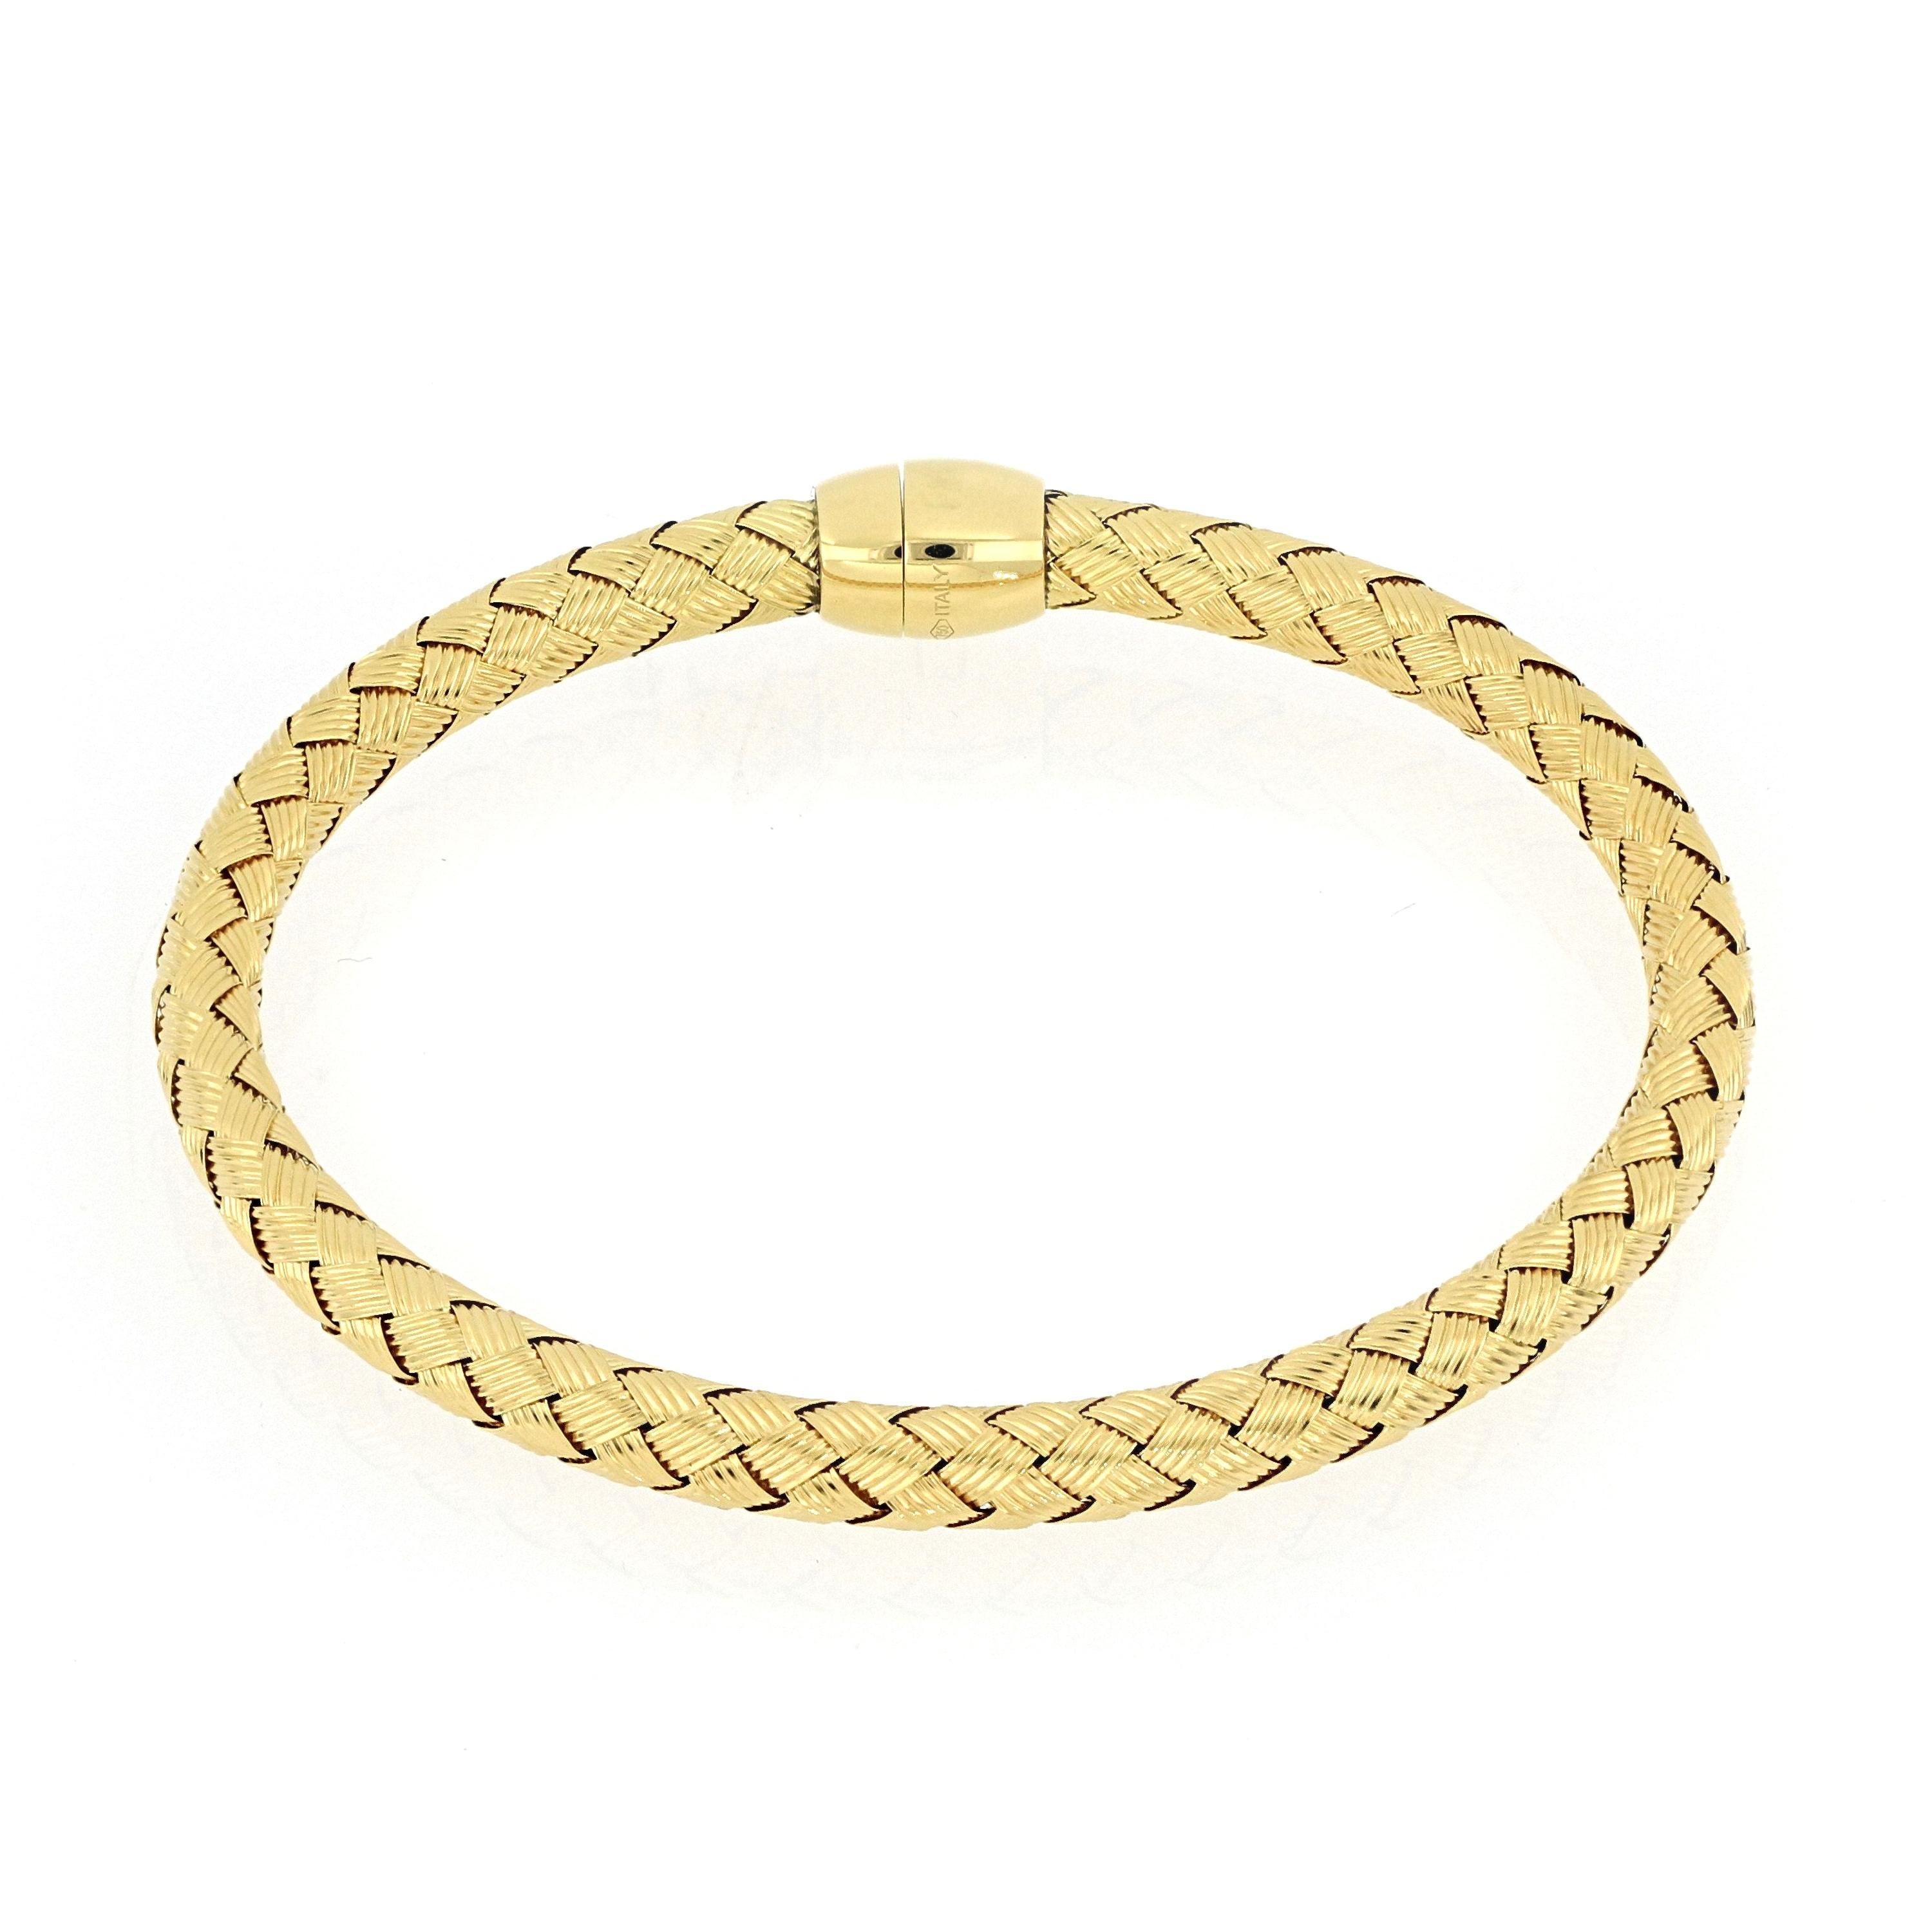 how much is a 18k gold bracelet worth